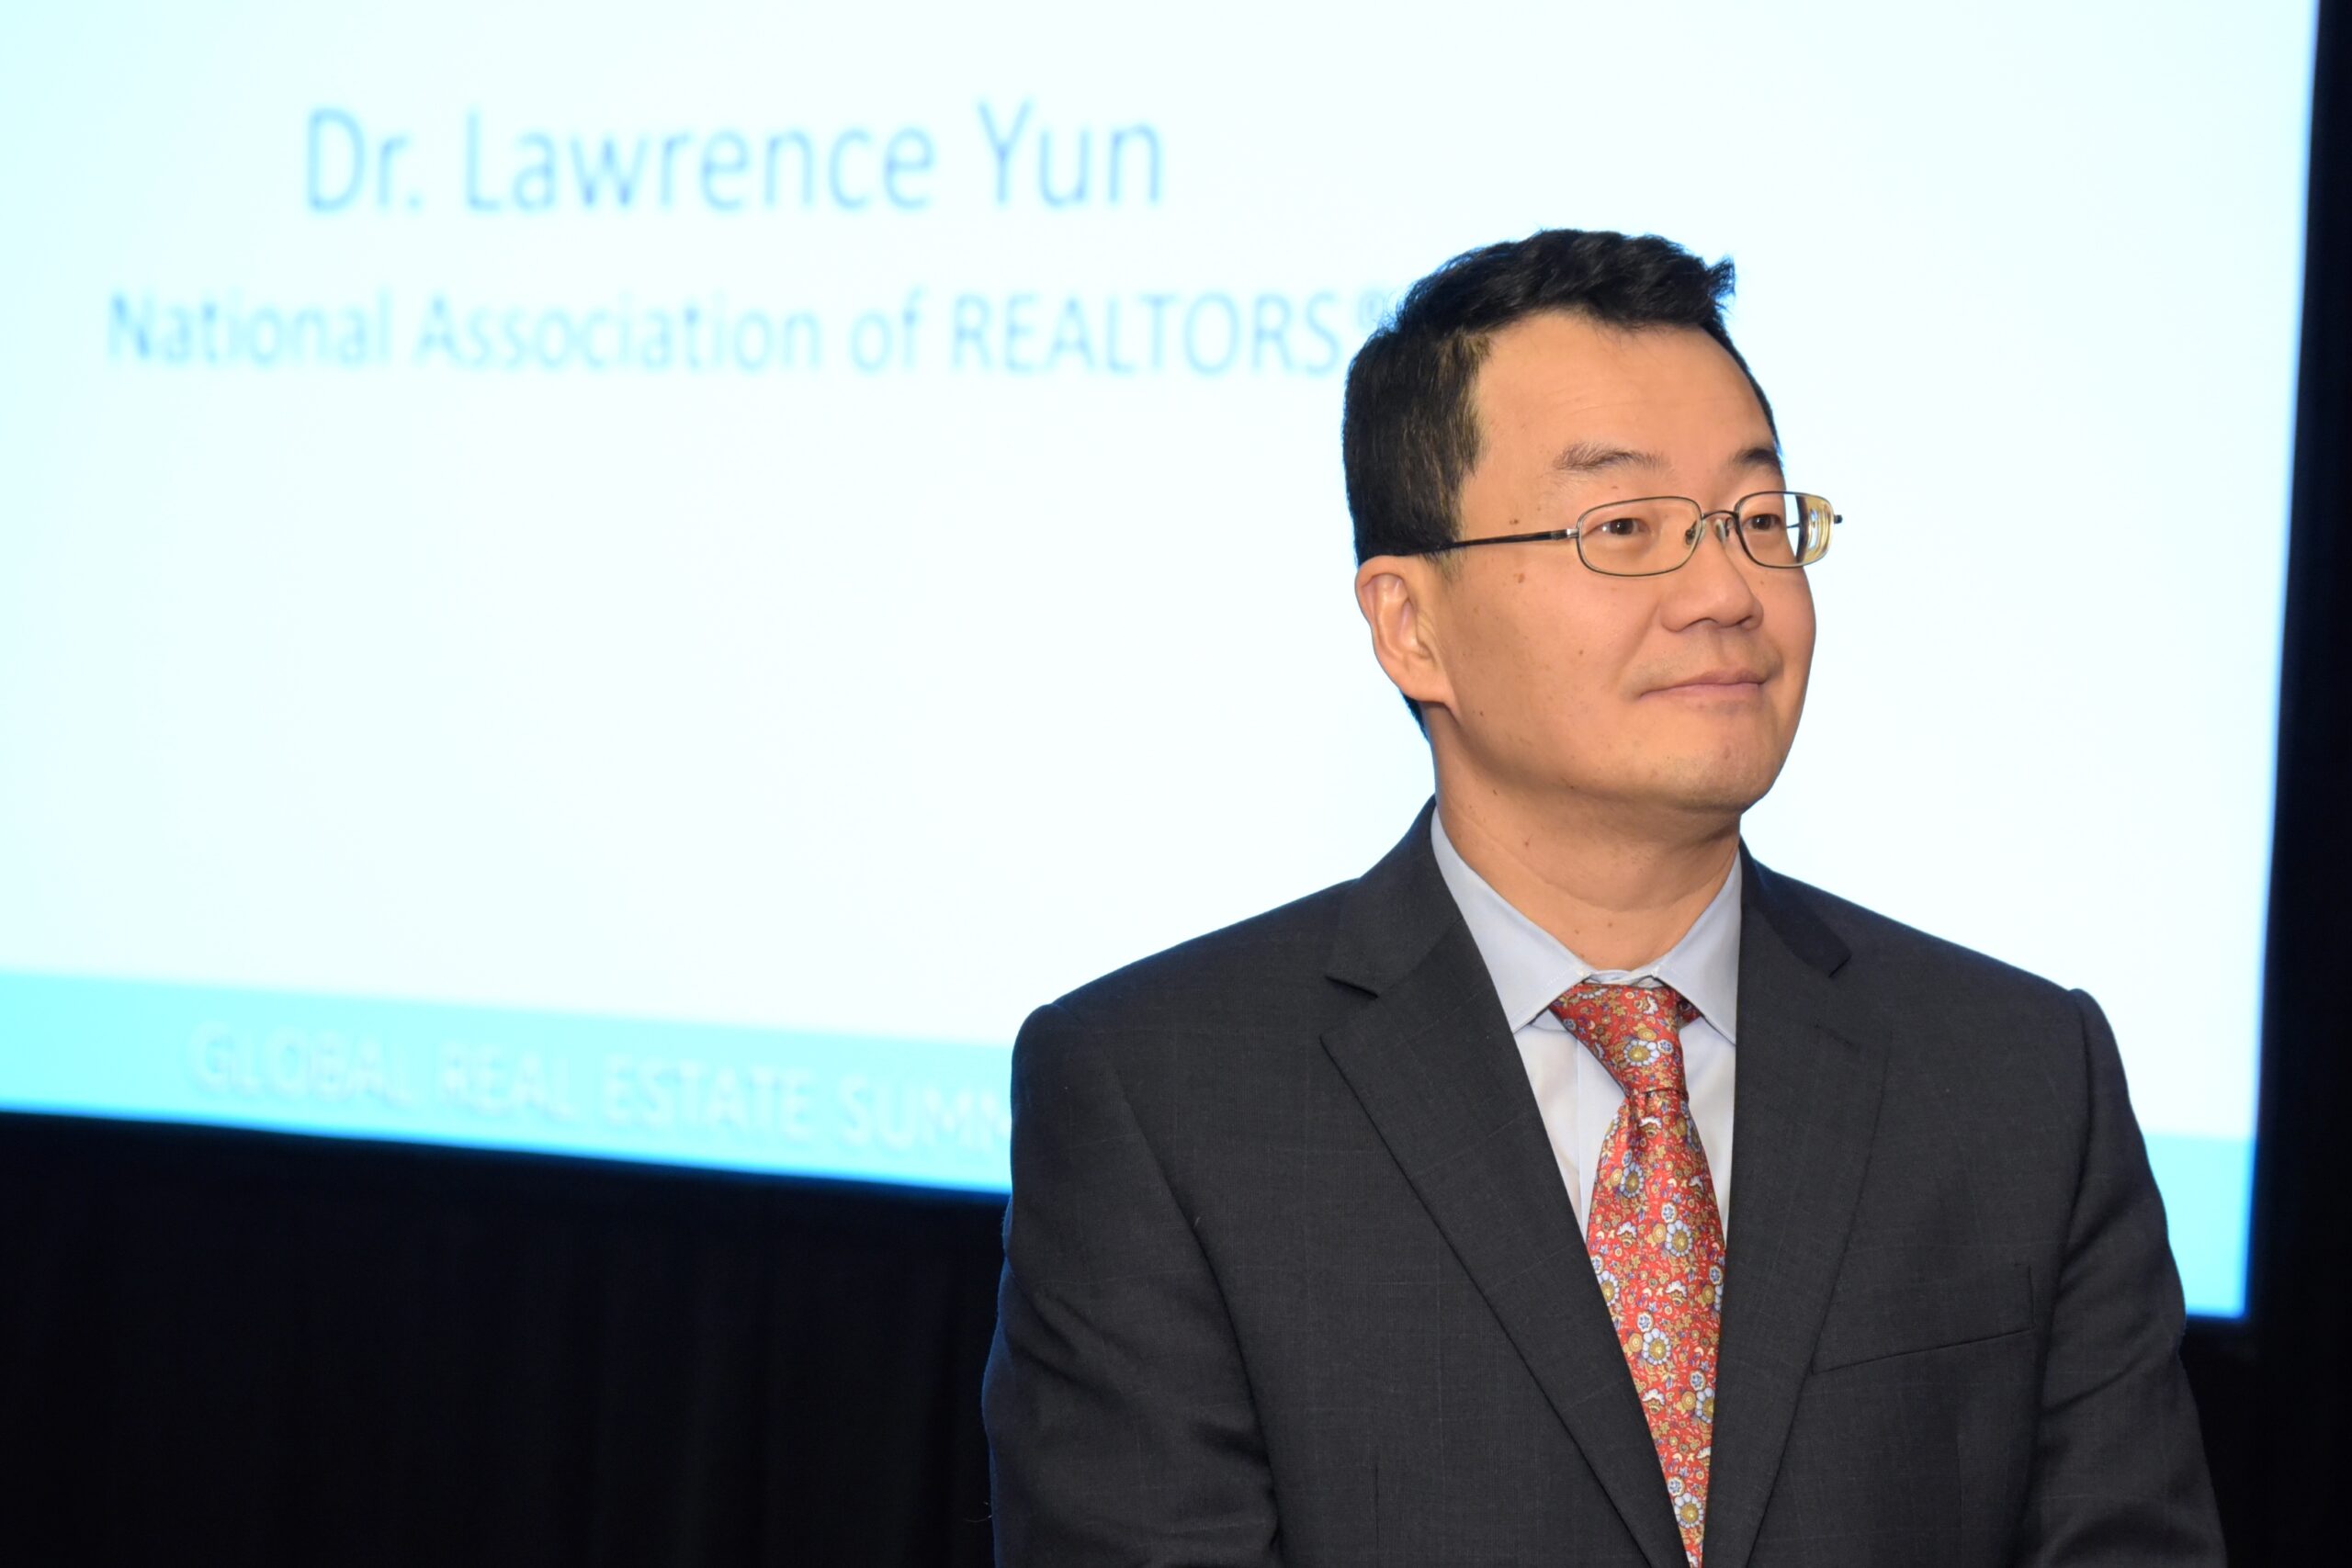 Lawrence Yun. He is NAR’s Chief Economist and oversees NAR’s Research Group